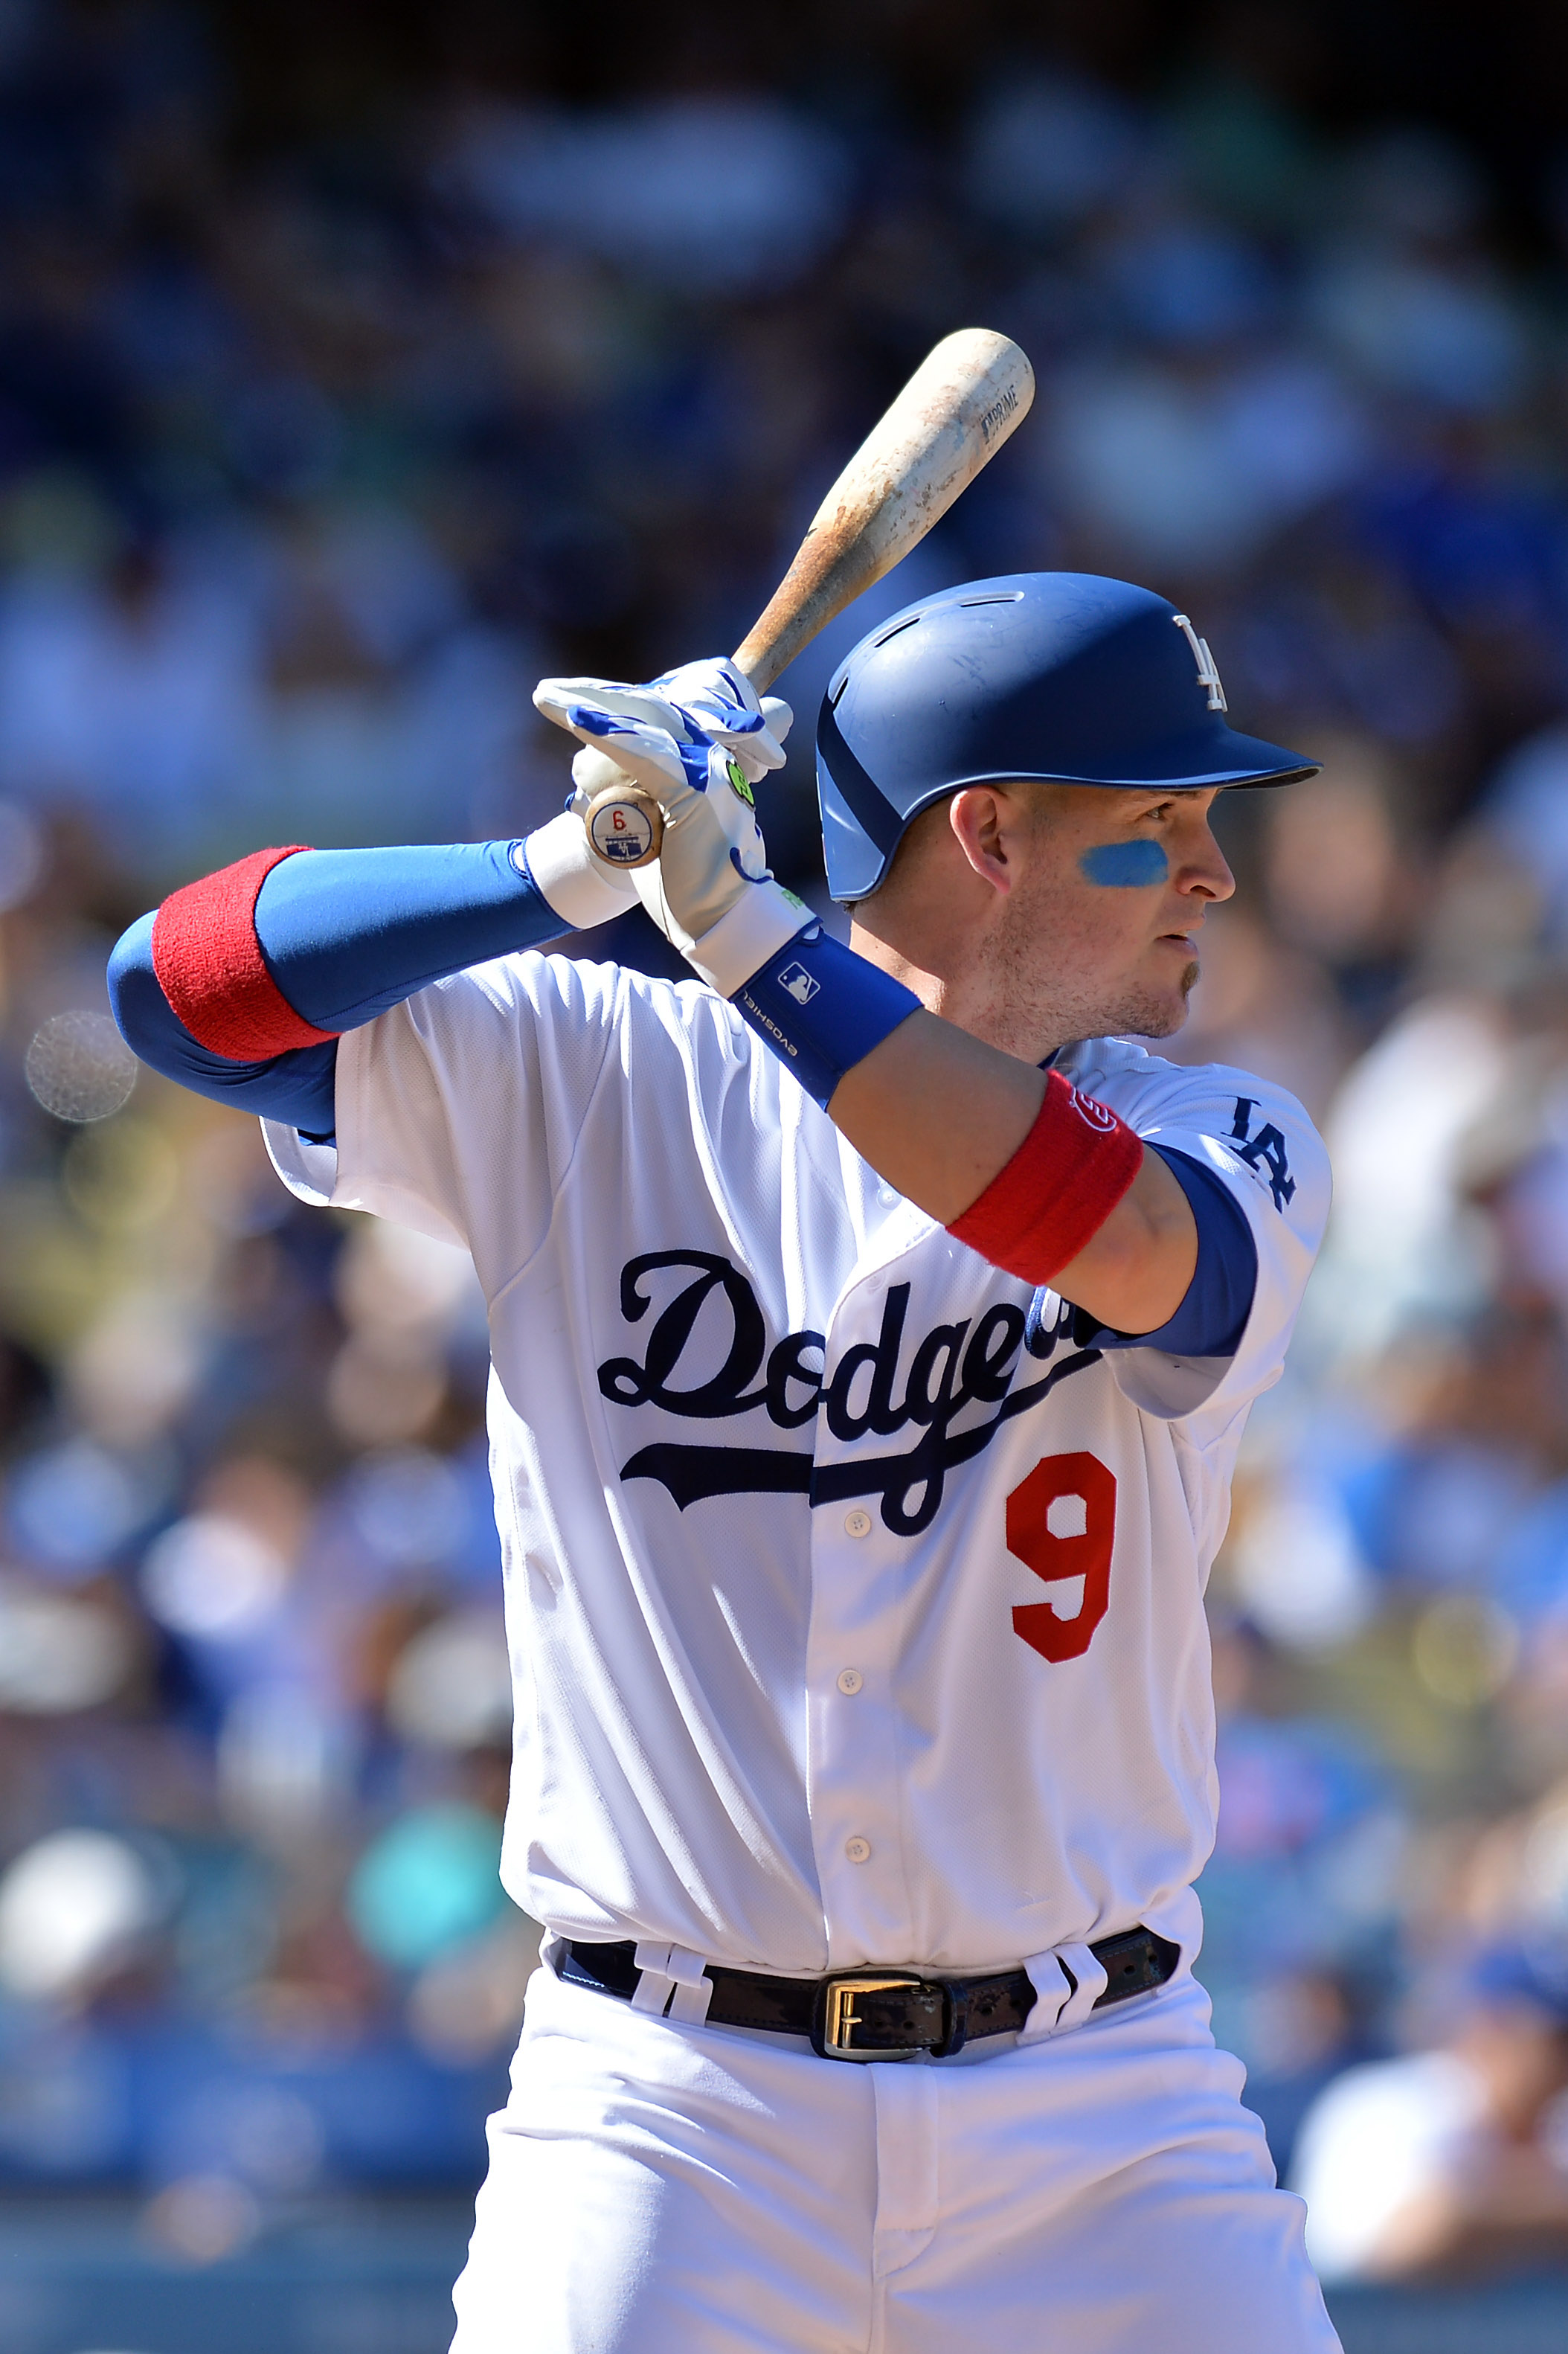 Yasmani Grandal: A comment like that is just unacceptable. It's